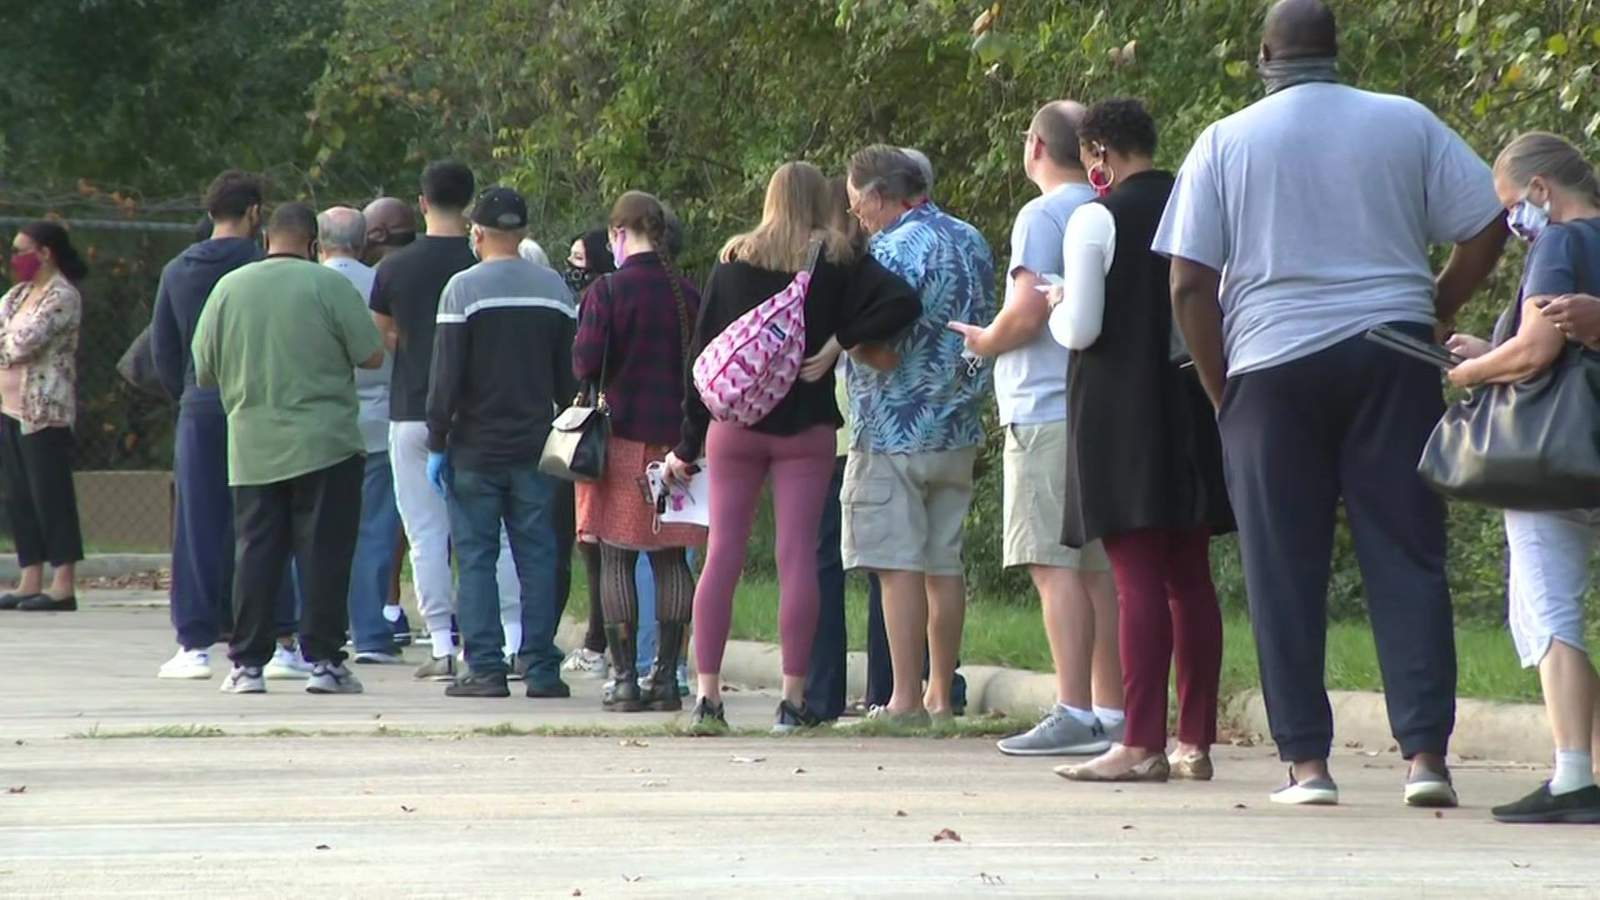 Harris County sets record for turnout on first day of early voting